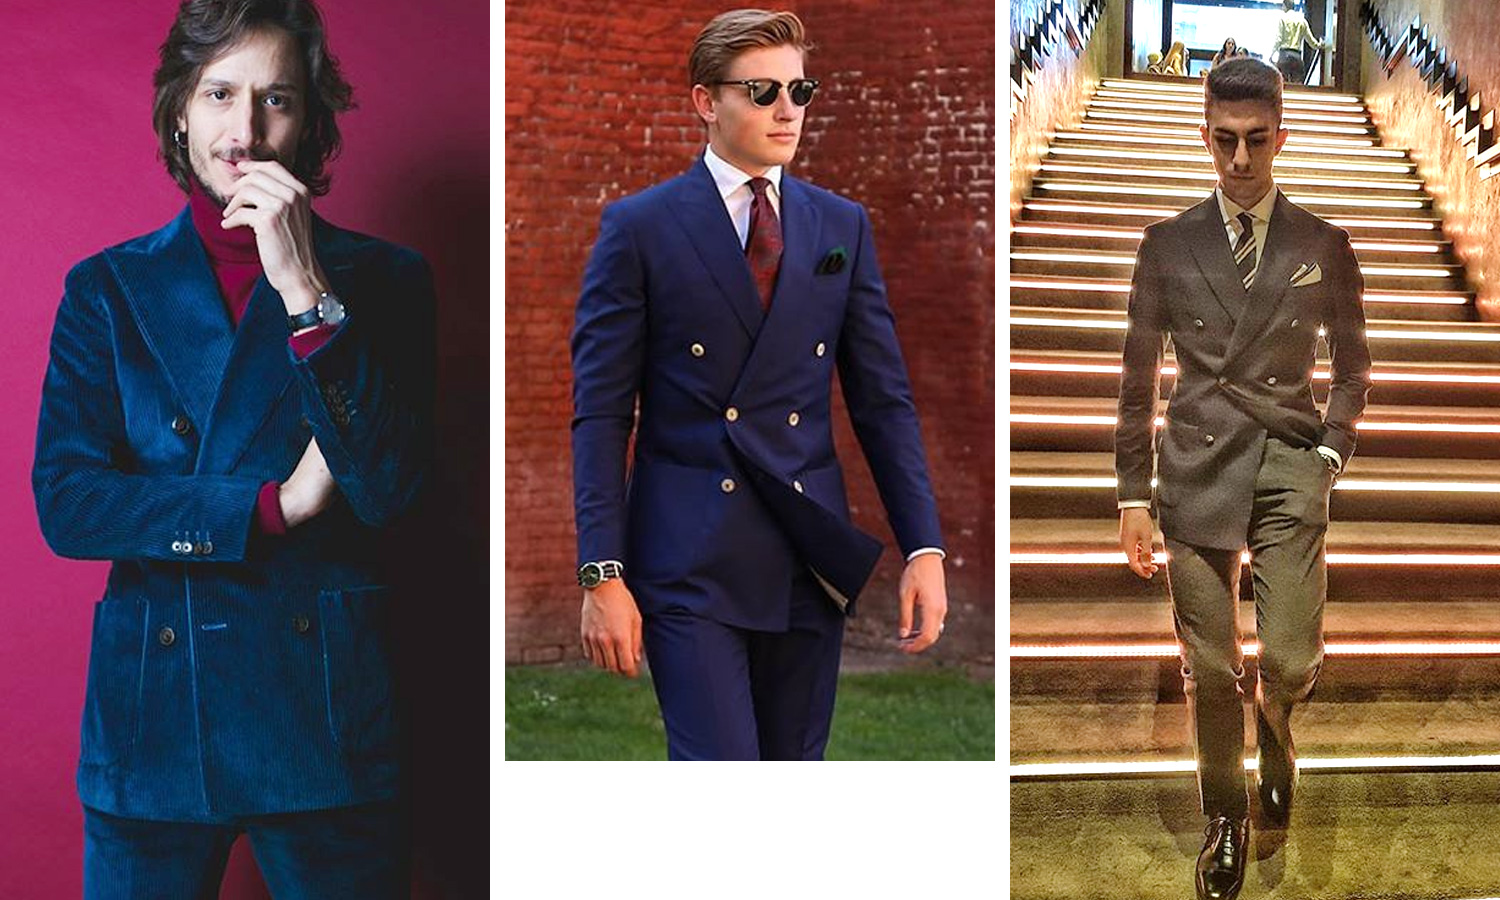 The modern double breasted suit: Italian style for 6x2, 4x2 button